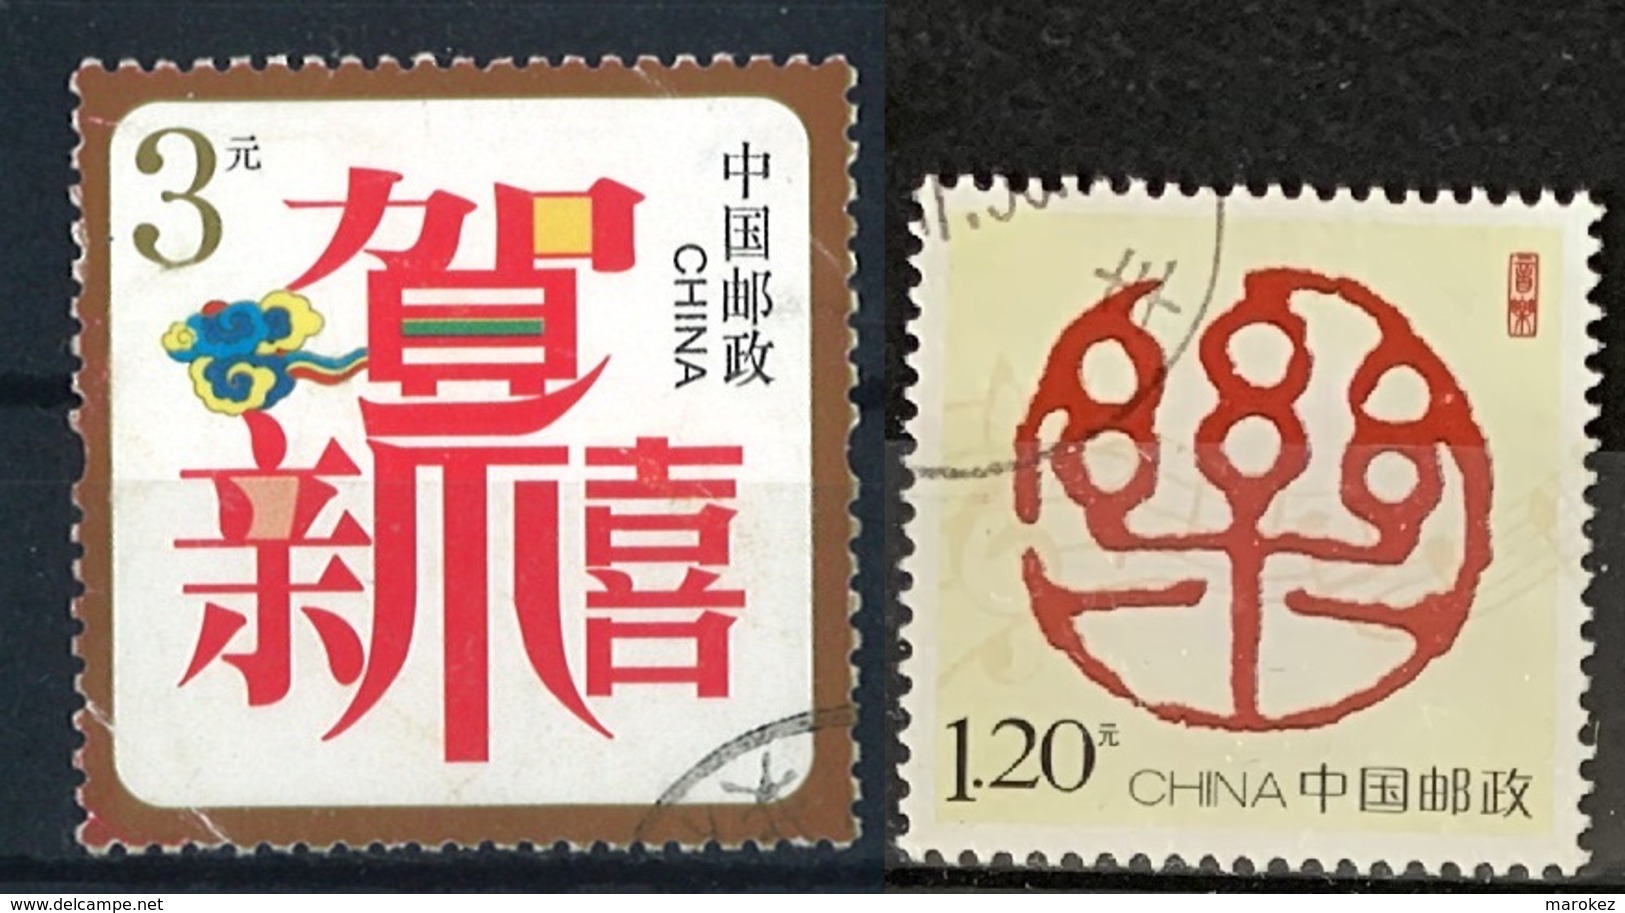 CHINA PRC 2008 New Year Greetings - Chinese Characters & Music - Chinese Character Postally Used MICHEL # 4012A,4096A - Used Stamps